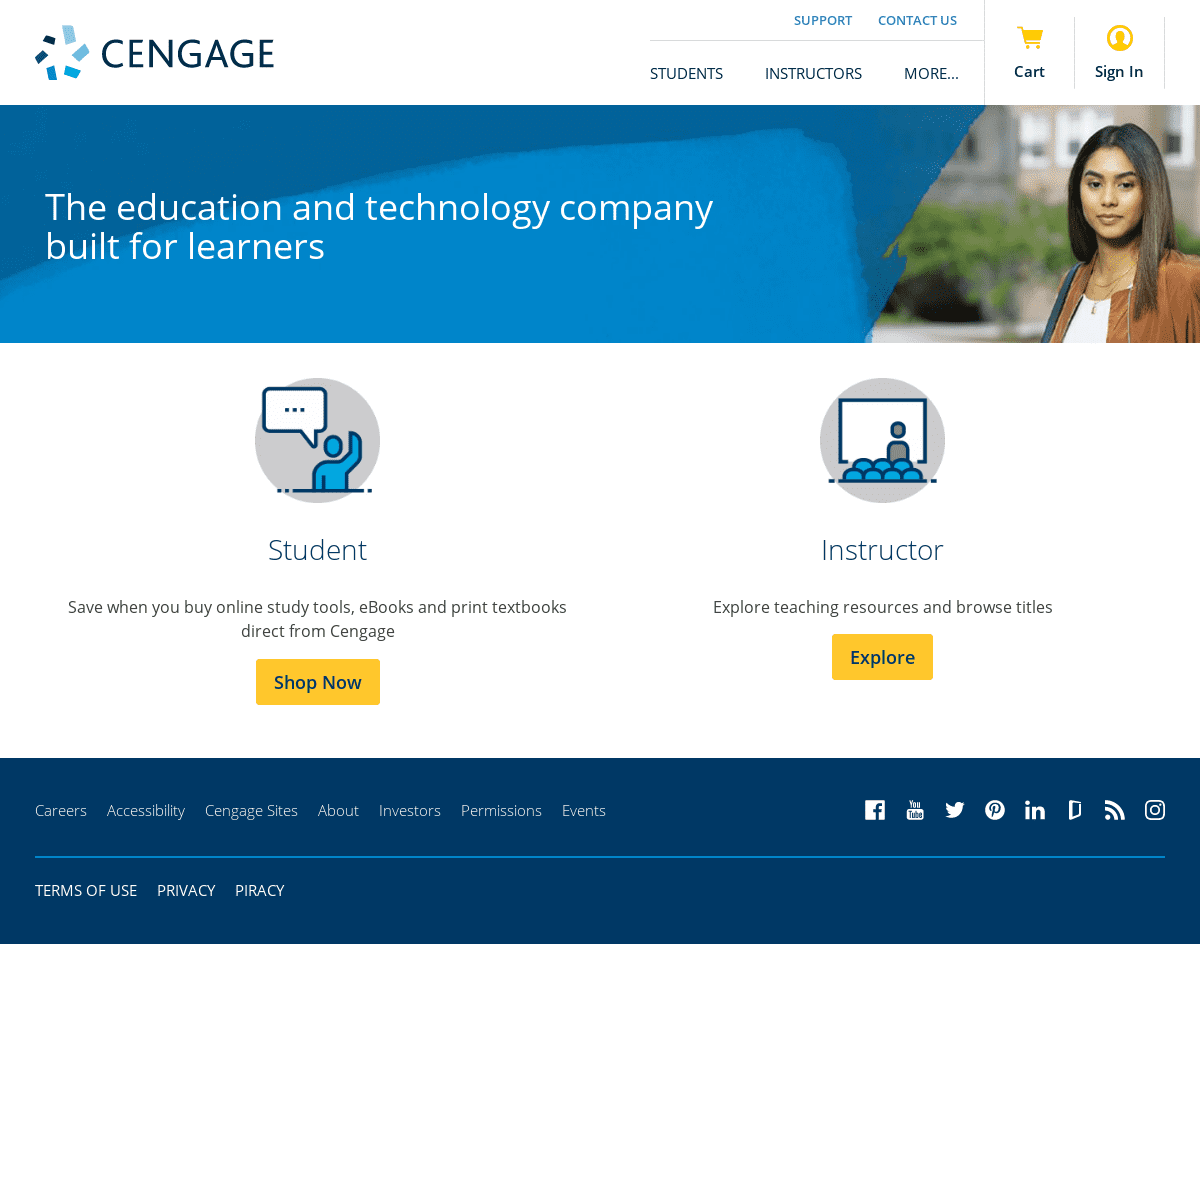 A complete backup of https://cengage.com